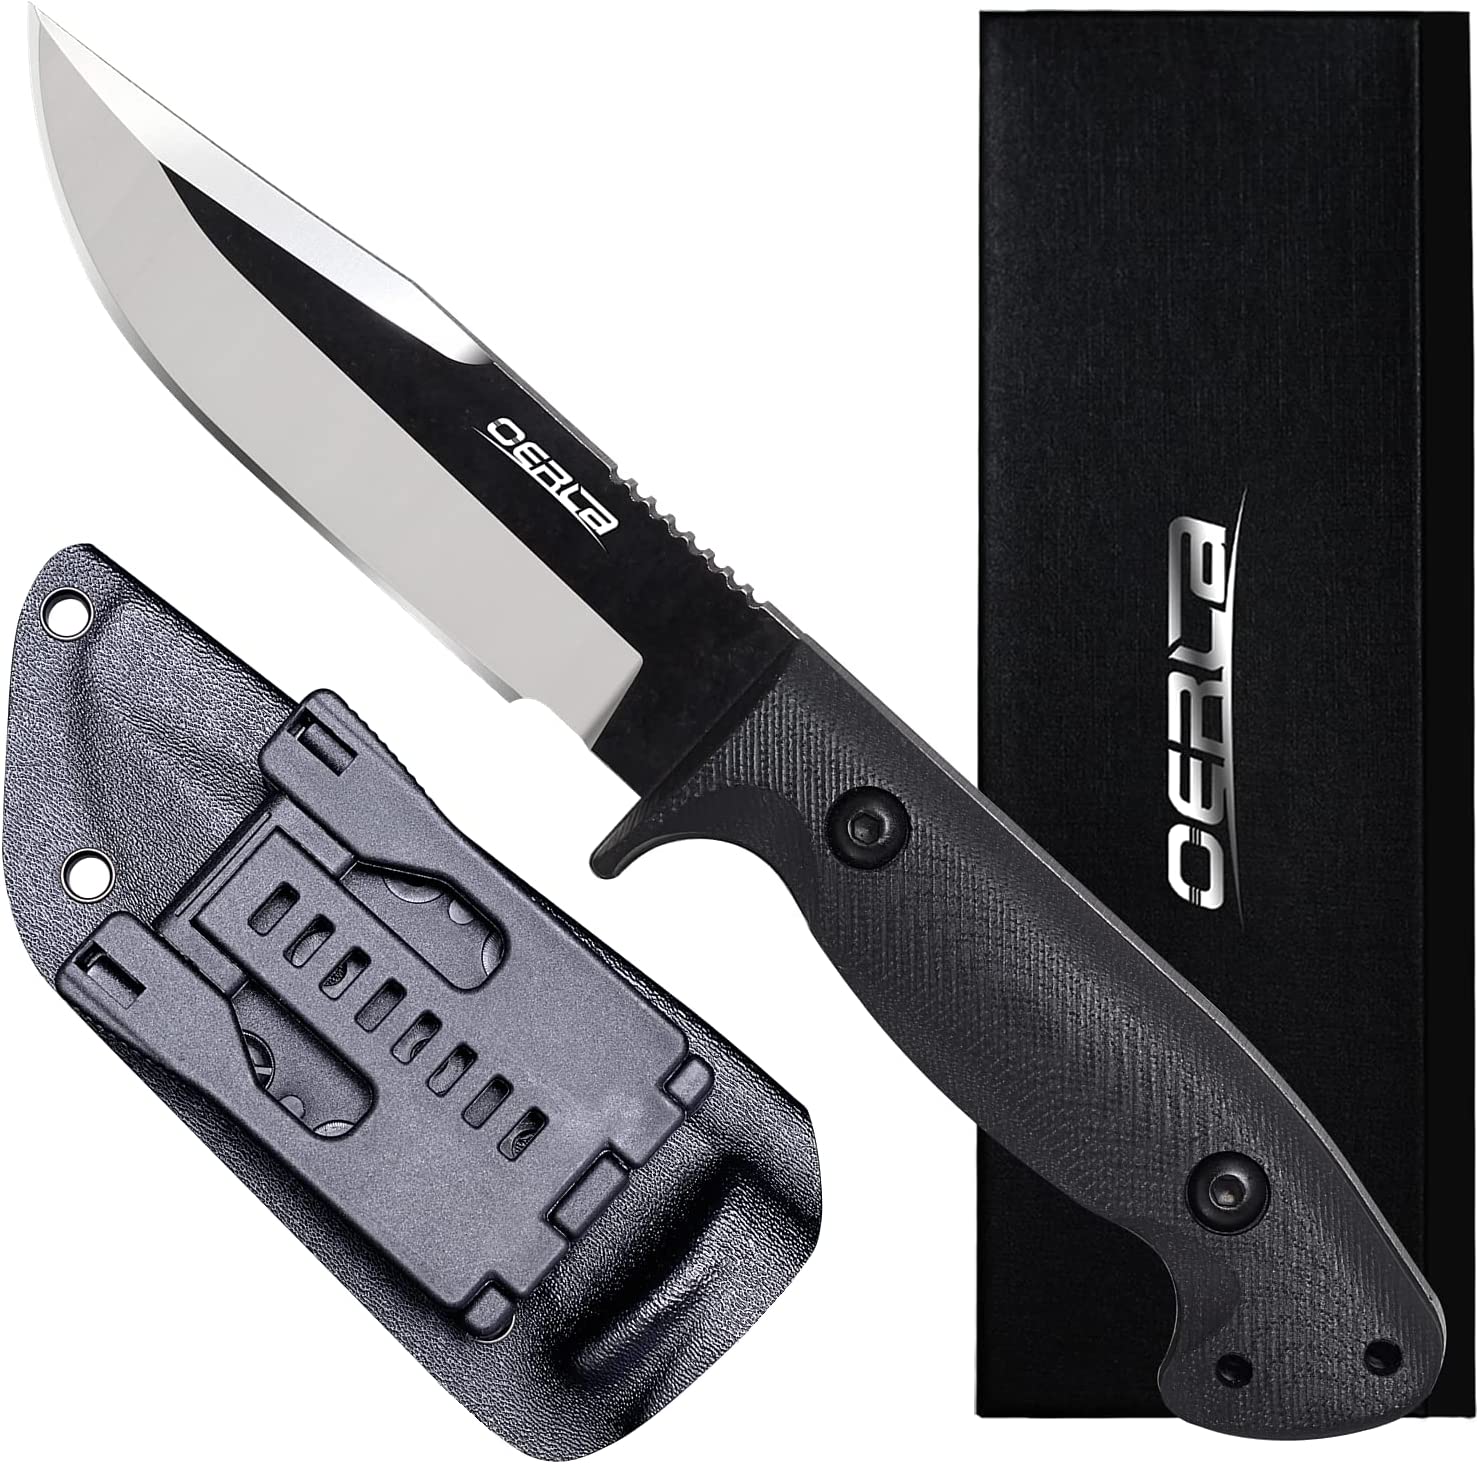 OERLA TAC Knives OLK-033RD 8.94-Inch Fixed Blade Camping Hunting Knife 420HC Steel with Black G10 Handle & Kydex Sheath